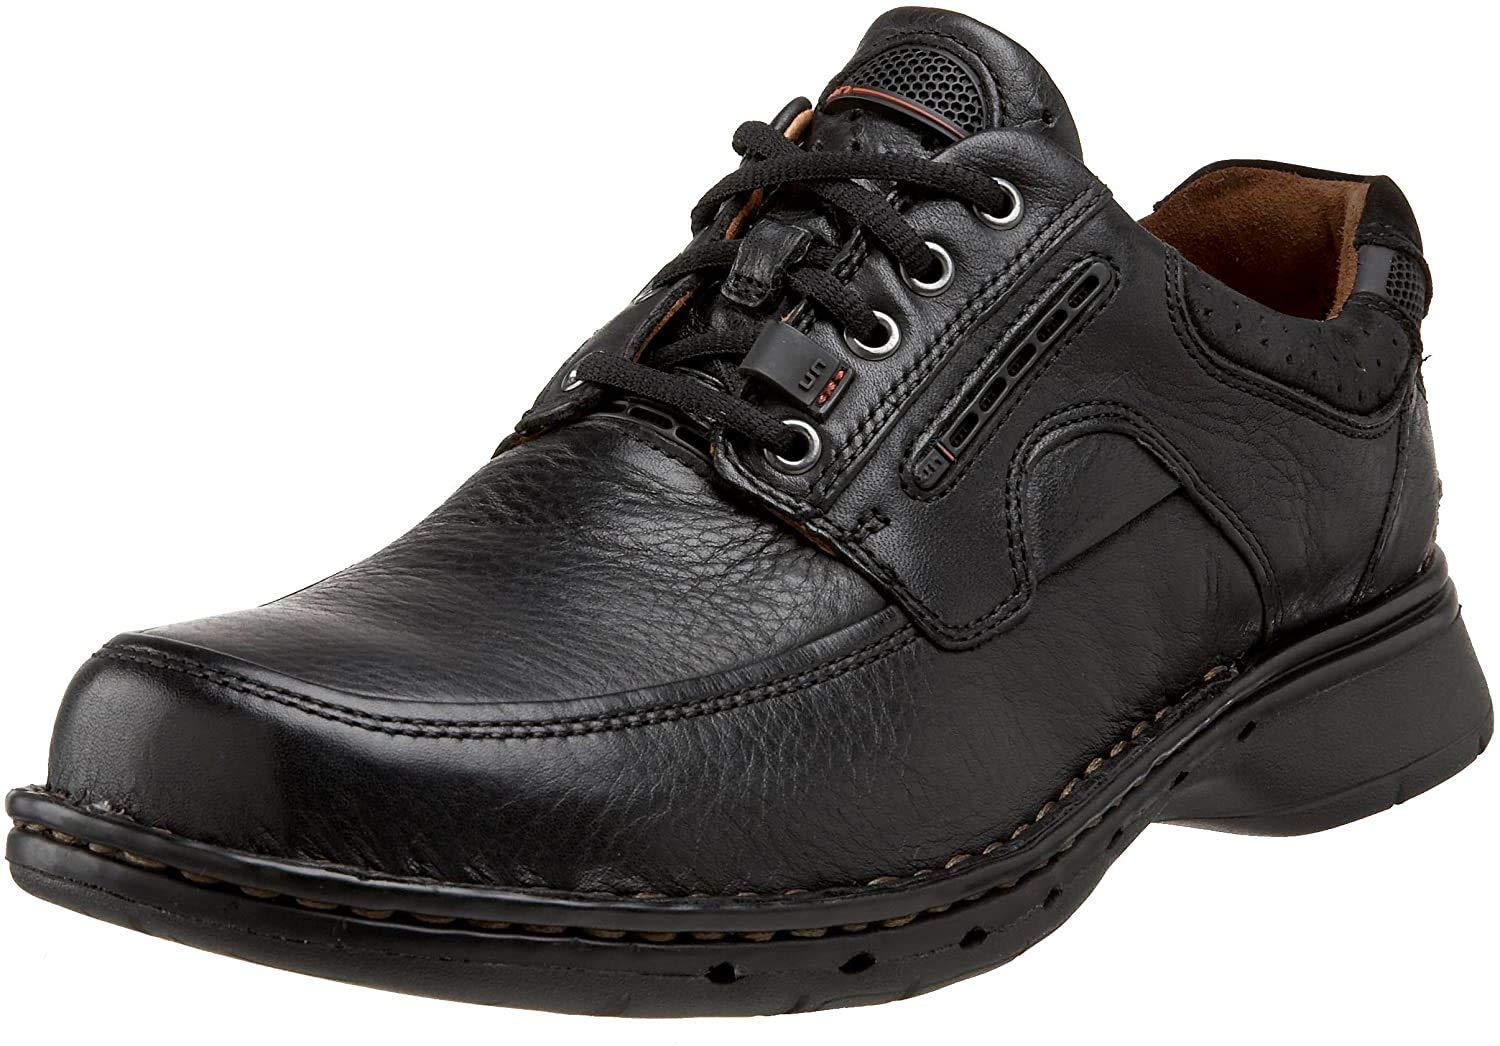 Clarks Unstructured Un.bend Casual Oxford,black,11 Xw Us for Men |